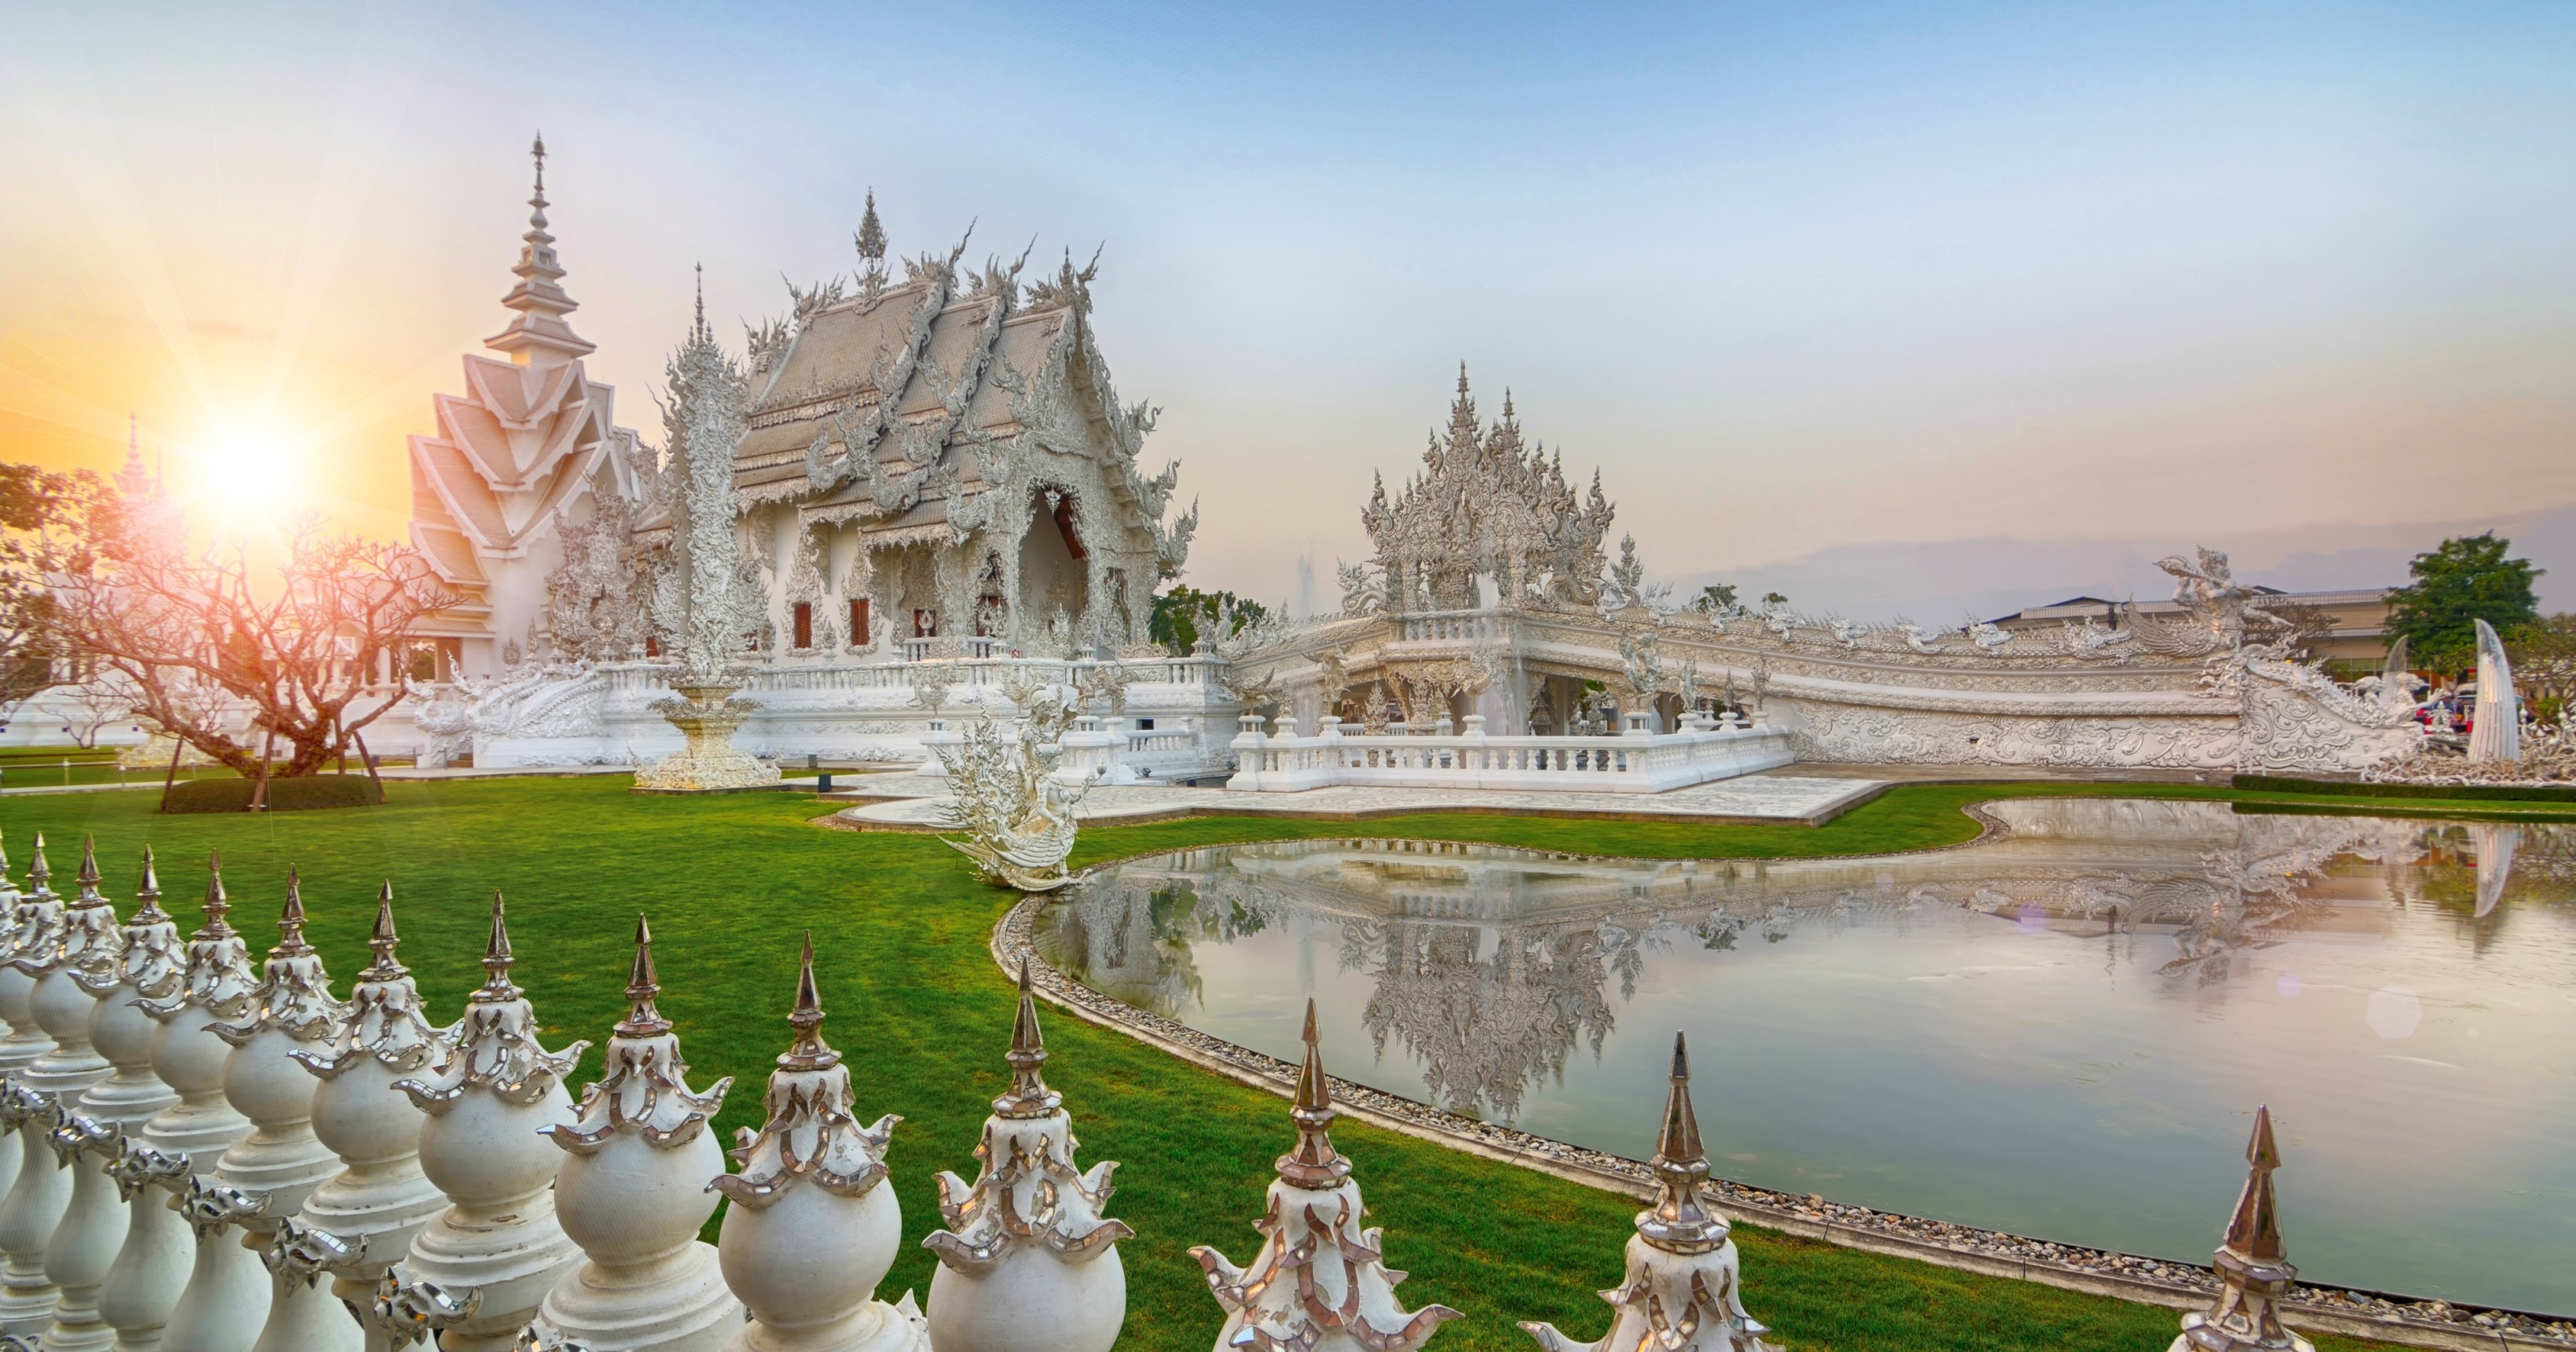 Thailand, Thai, Temple, Sun, Sky, White, Green, Water, Building, Architecture, Asian architecture, Traditional art Wallpaper